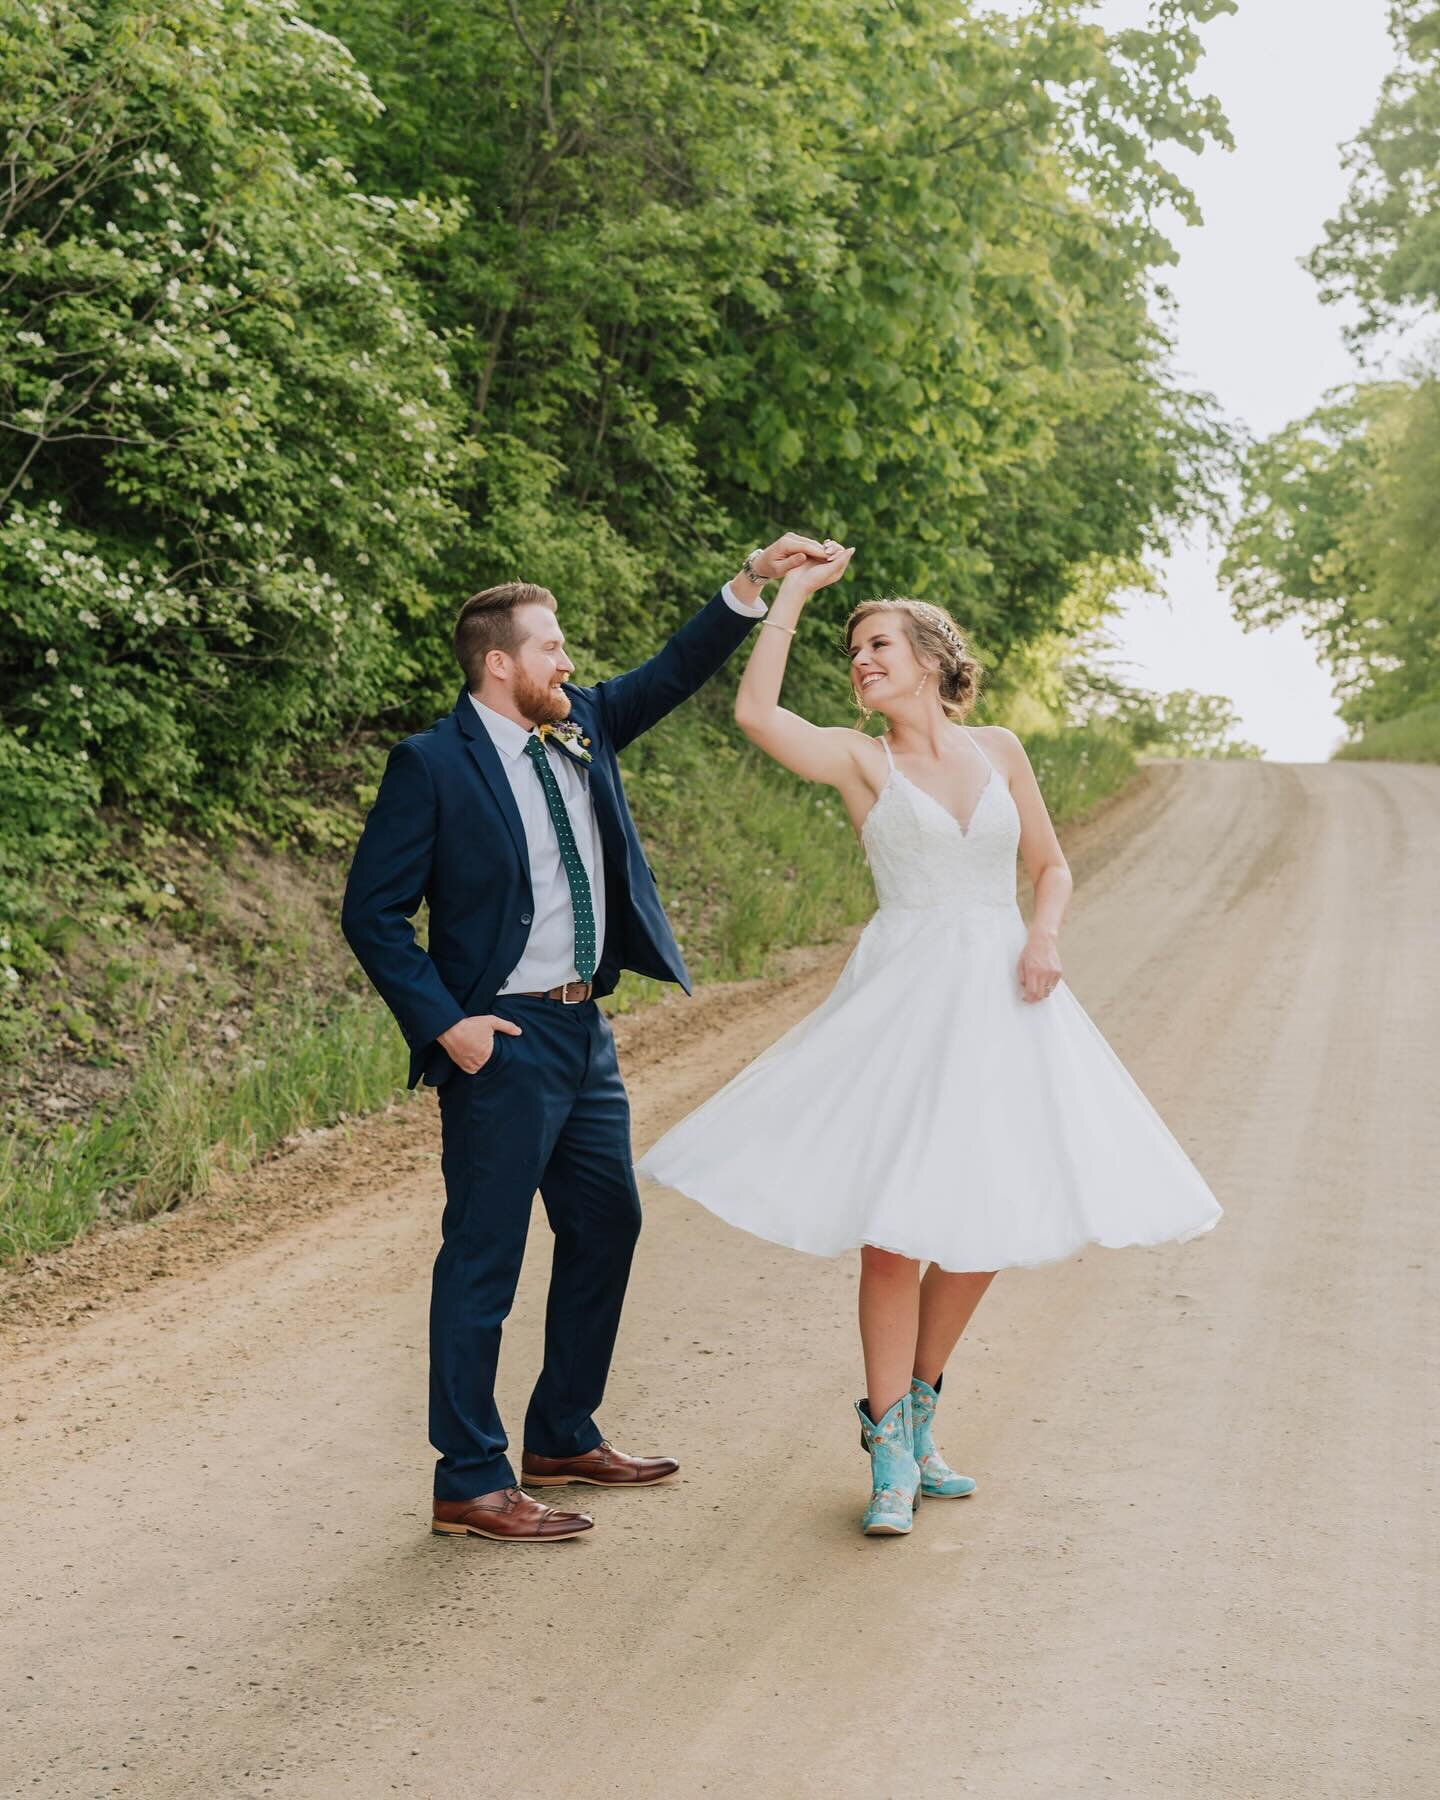 10/10 recommend whipping out a surprise 2nd dress/shoes for your ✨husband✨ during your reception. 🥹

We HAD to step away for a quick 10 min dirt road moment. 📸 I left this wedding in such a good mood! So much fun!